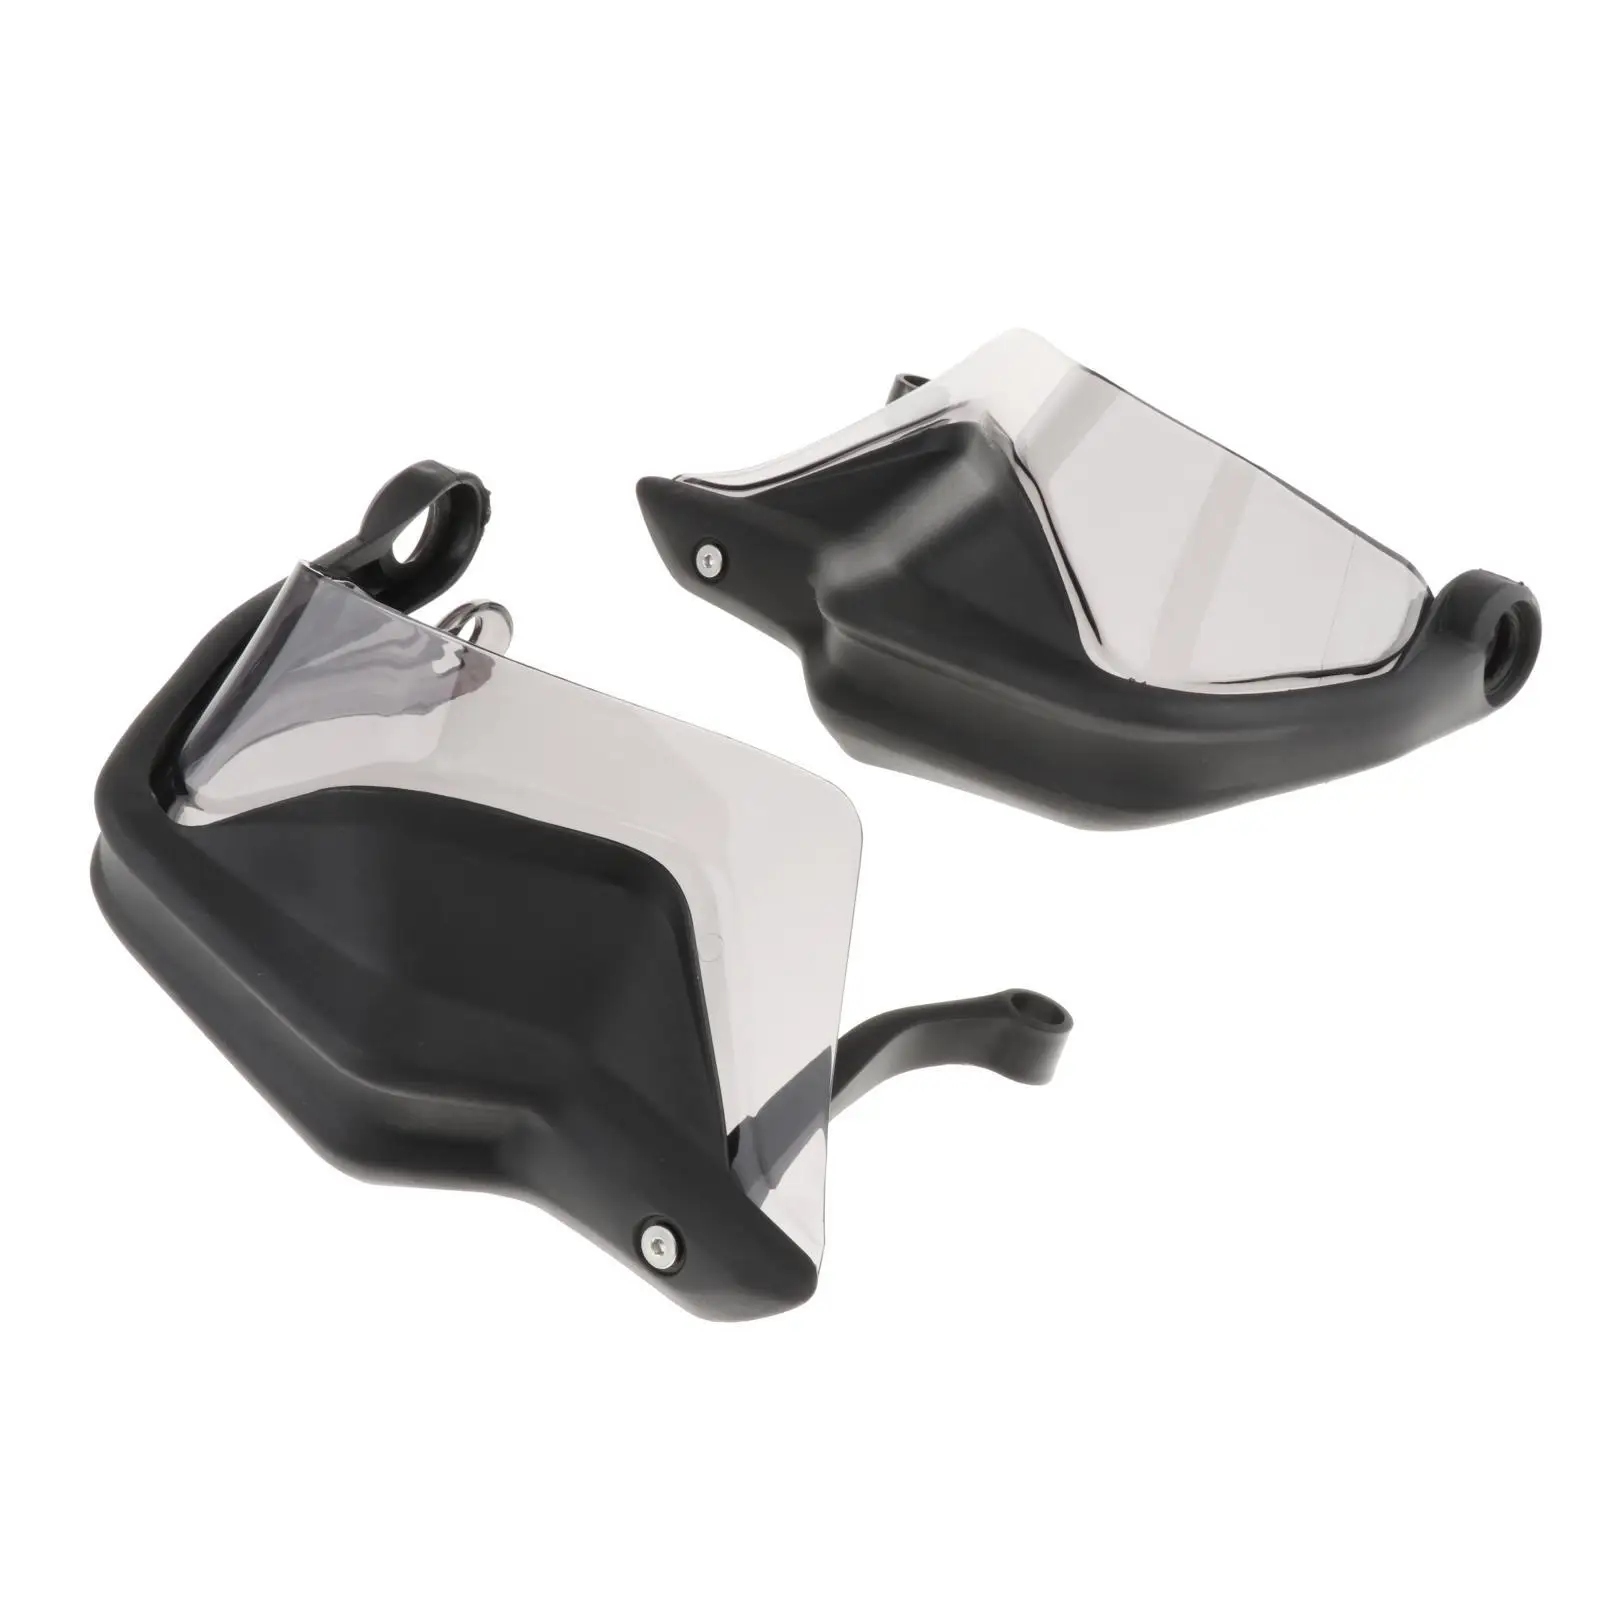 2x Motorcycle Hand Protector Durable 10.63x10.63x5.91